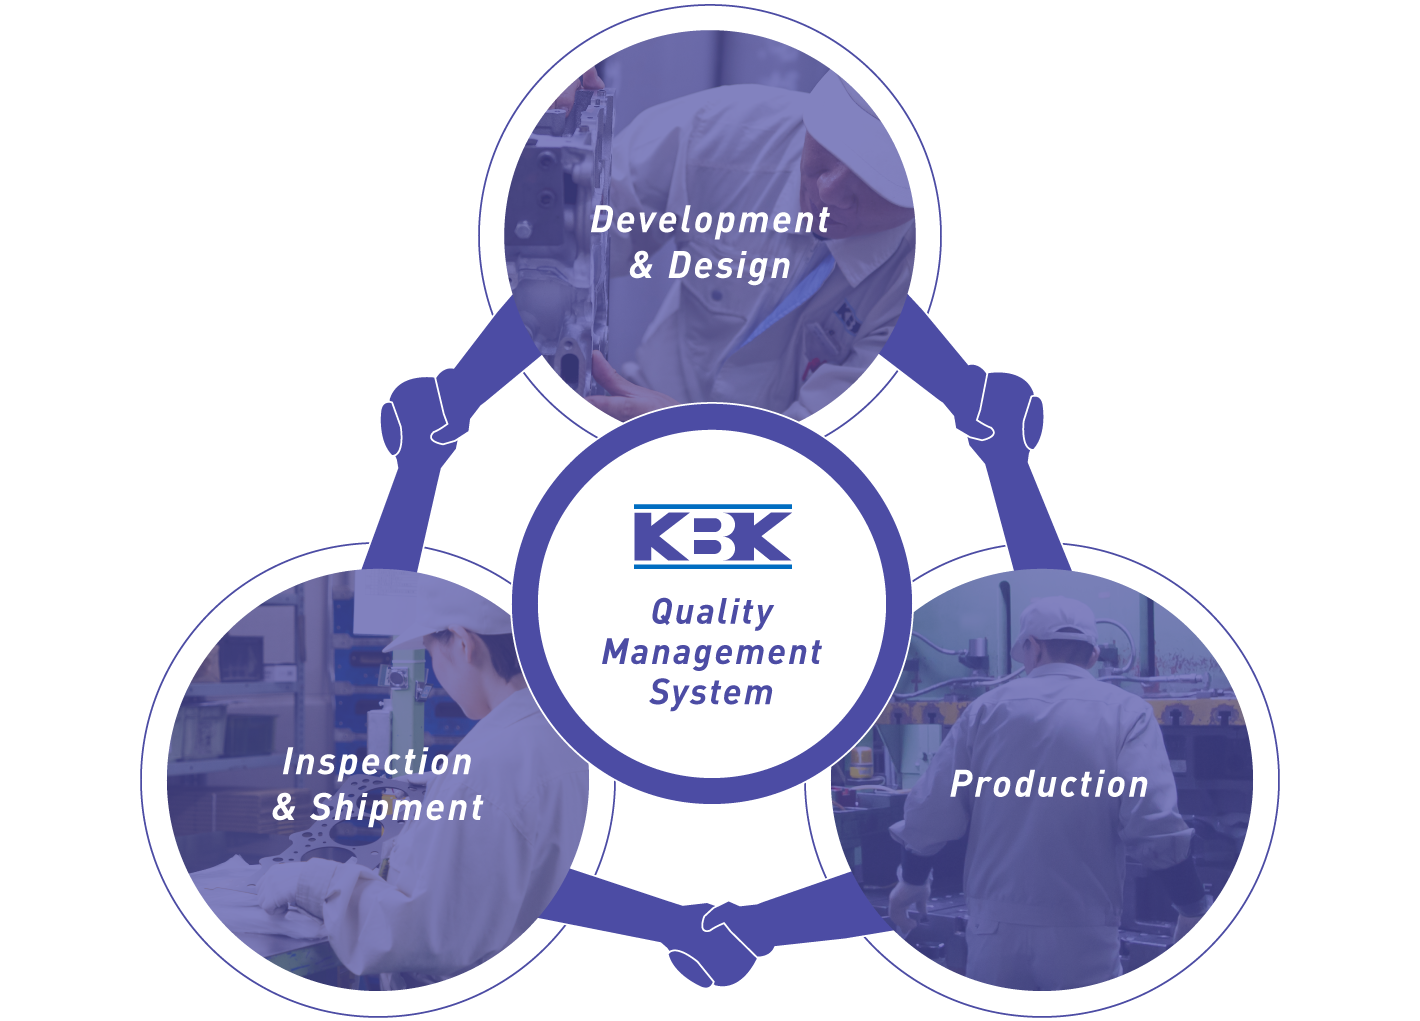 We are applying a quality management system from start to finish.